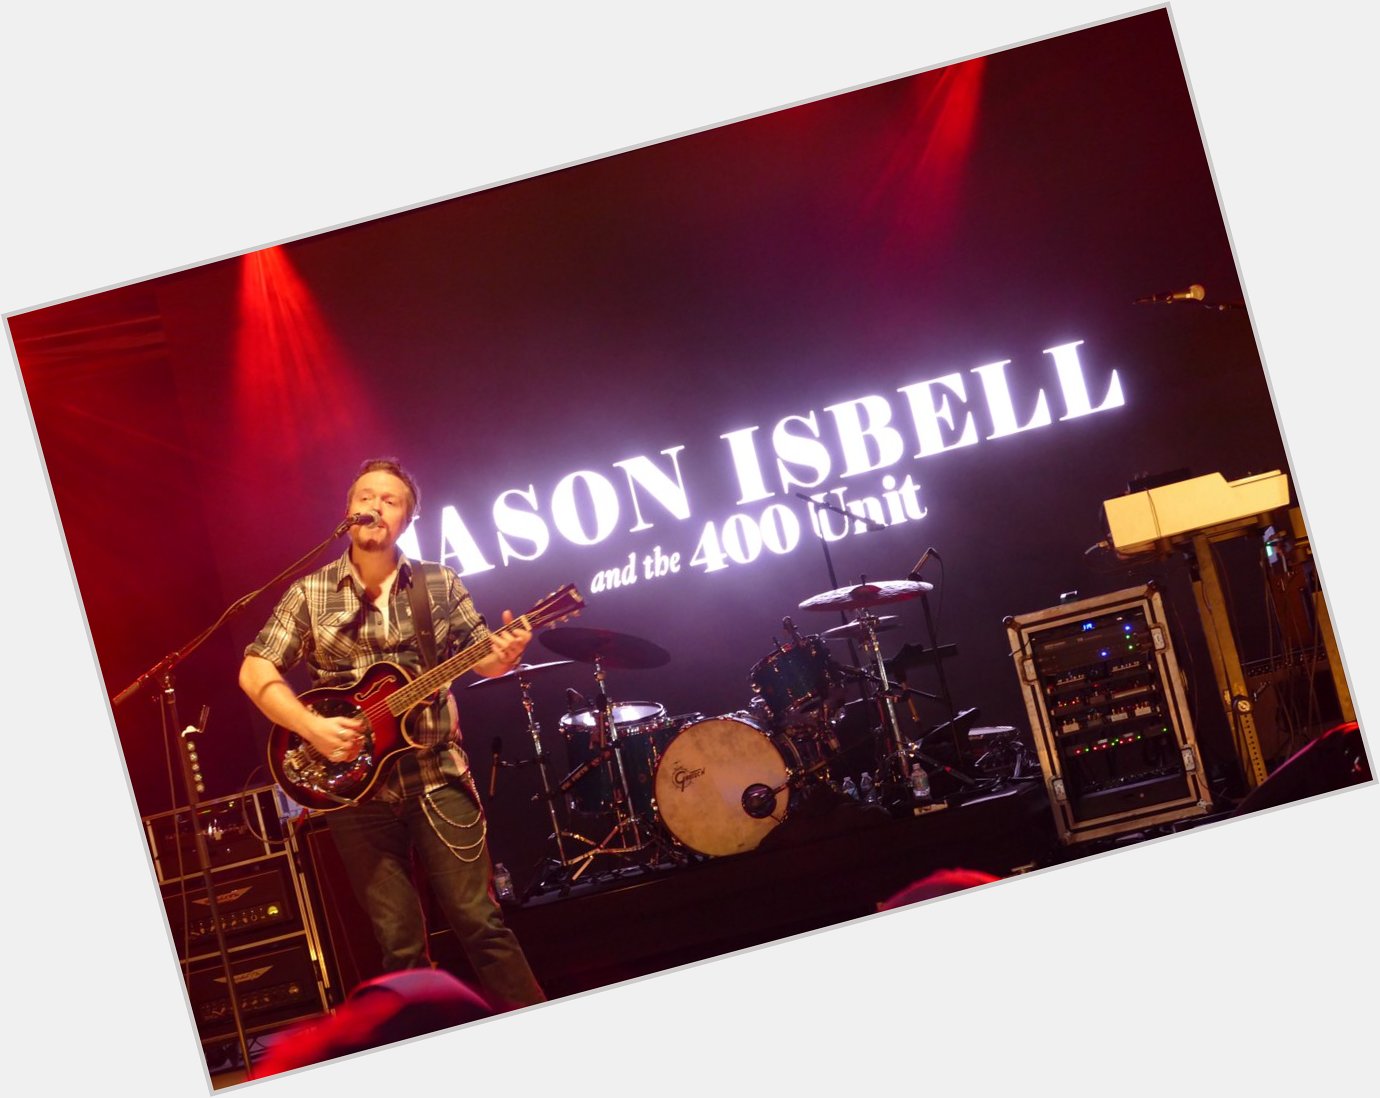 Happy Birthday !
What are some of your favorite Jason Isbell songs / lyrics? 